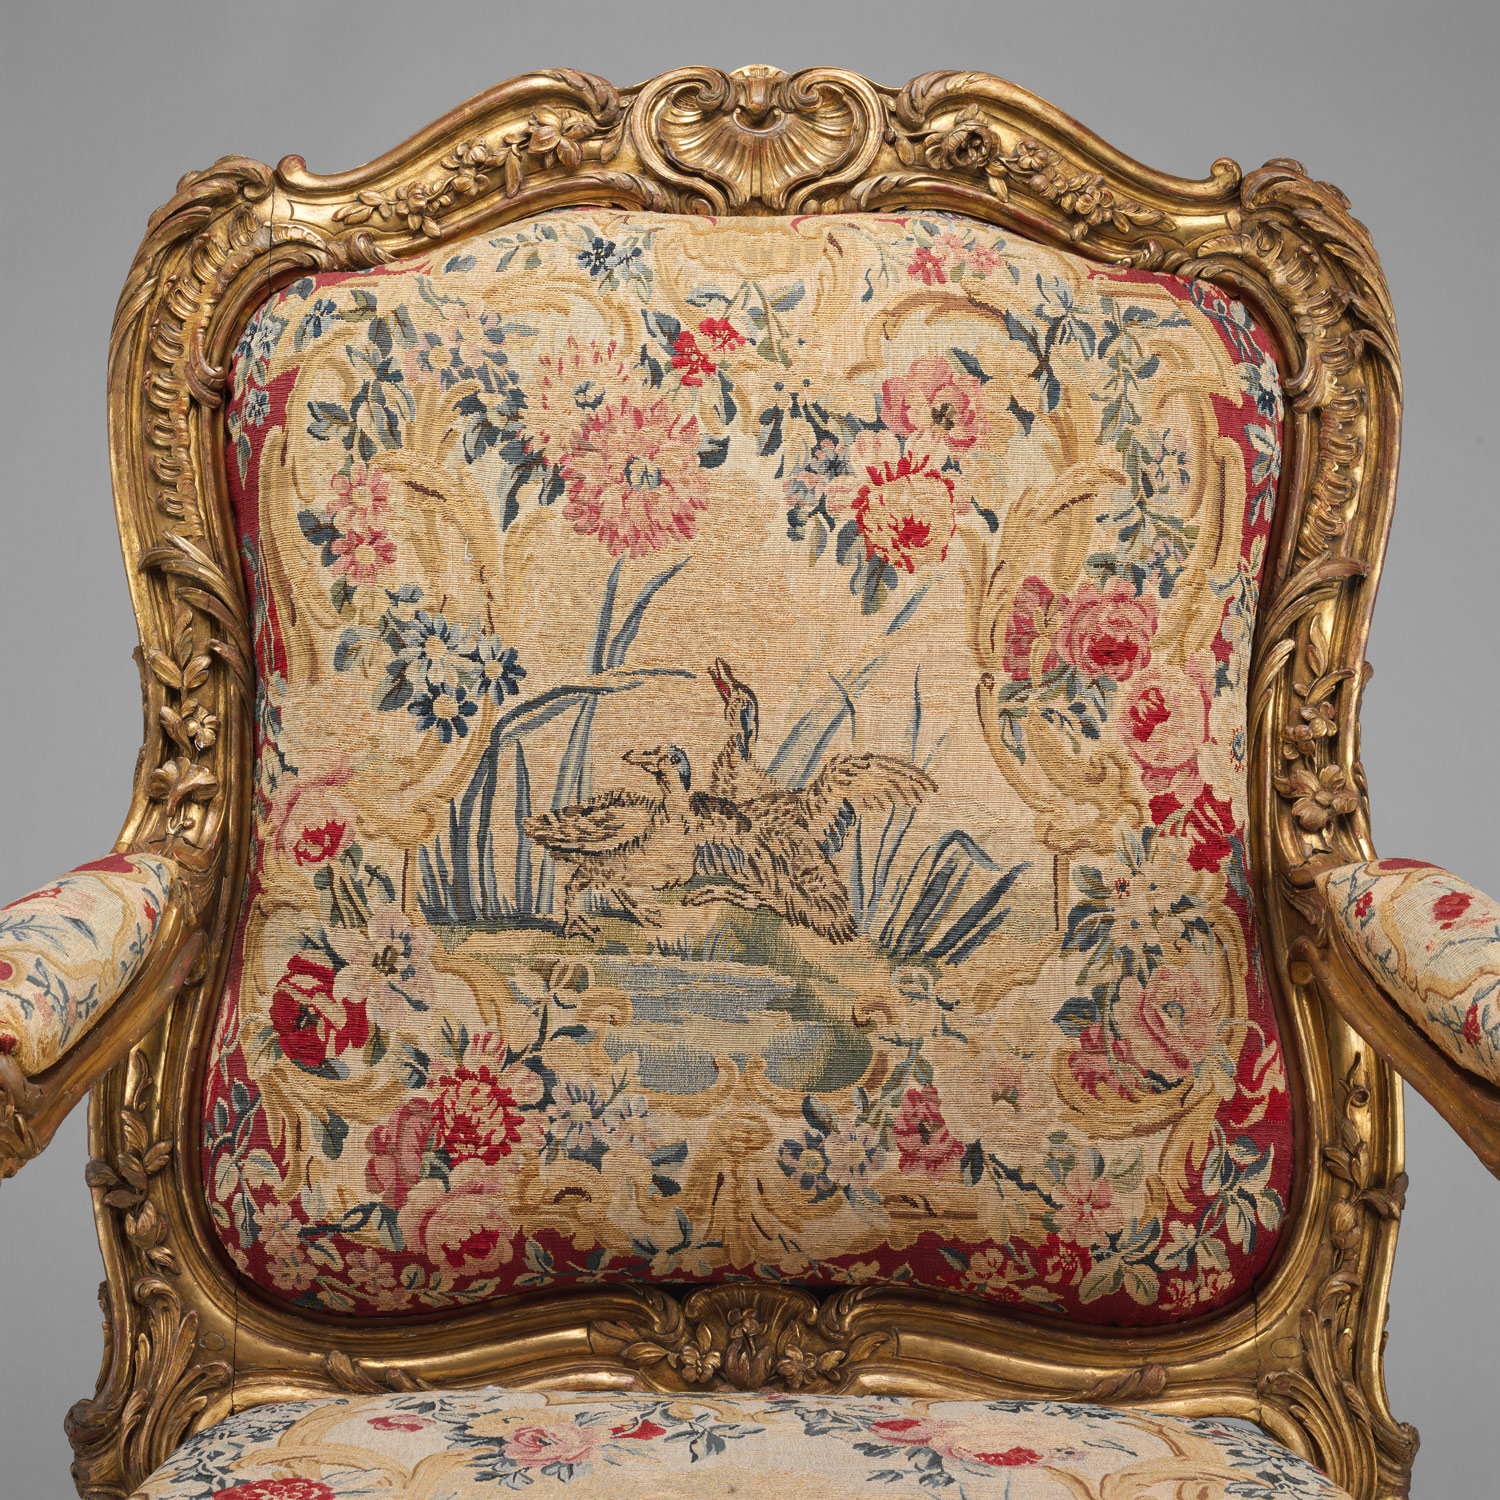 Detail of Armchair (fauteuil à la reine) showing upholstery and frame. Photo: Metropolitan Museum of Art, New York (66.60.2). 